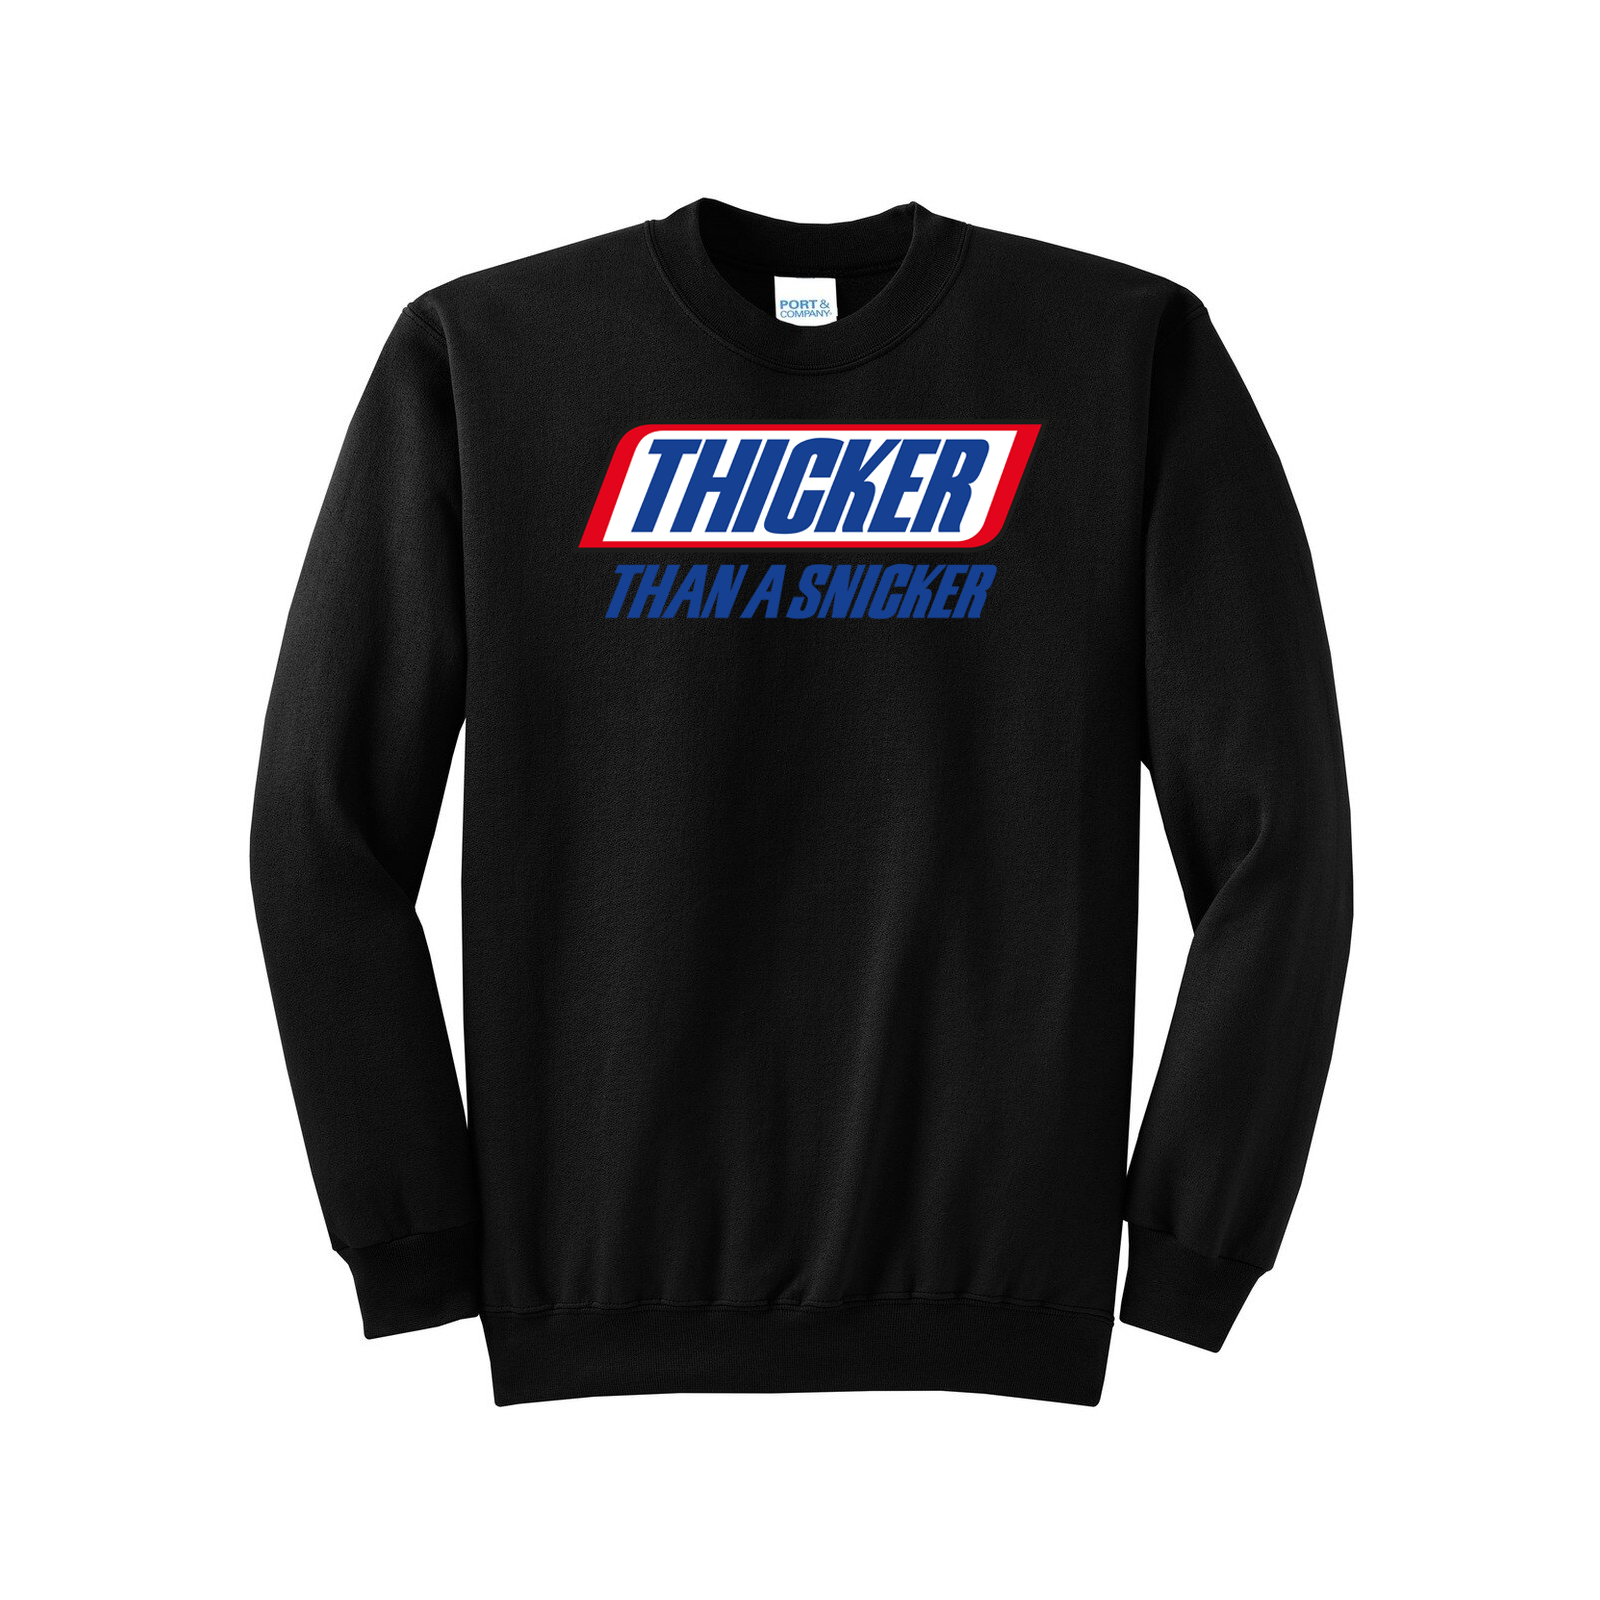 'Thicker Than A Snicker' Long Sleeve Crewneck